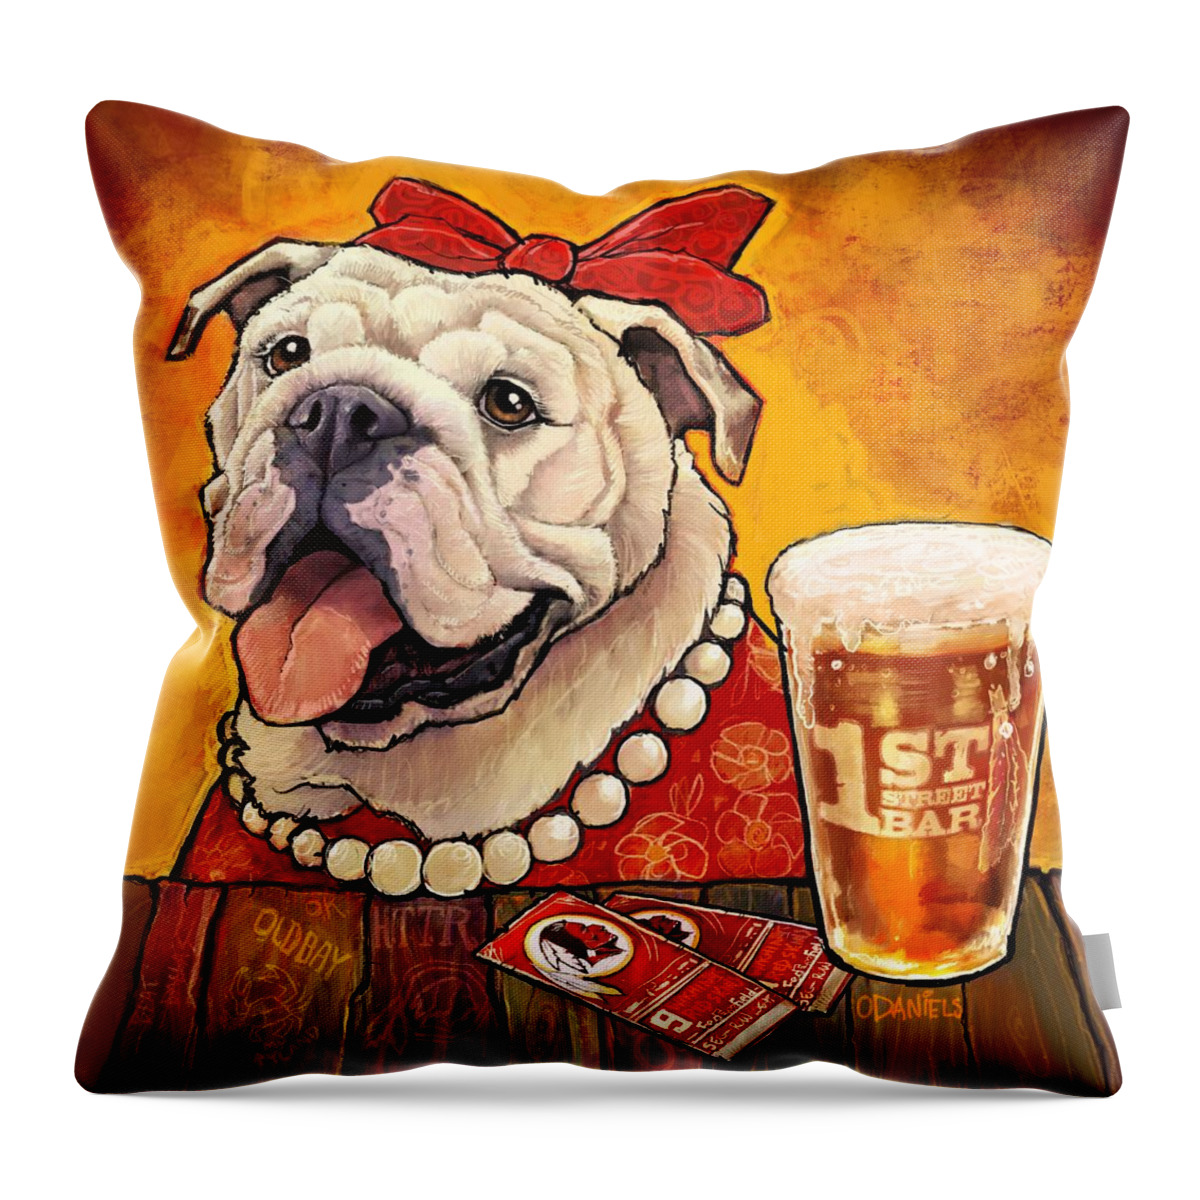 Bulldog Throw Pillow featuring the painting Game Day by Sean ODaniels